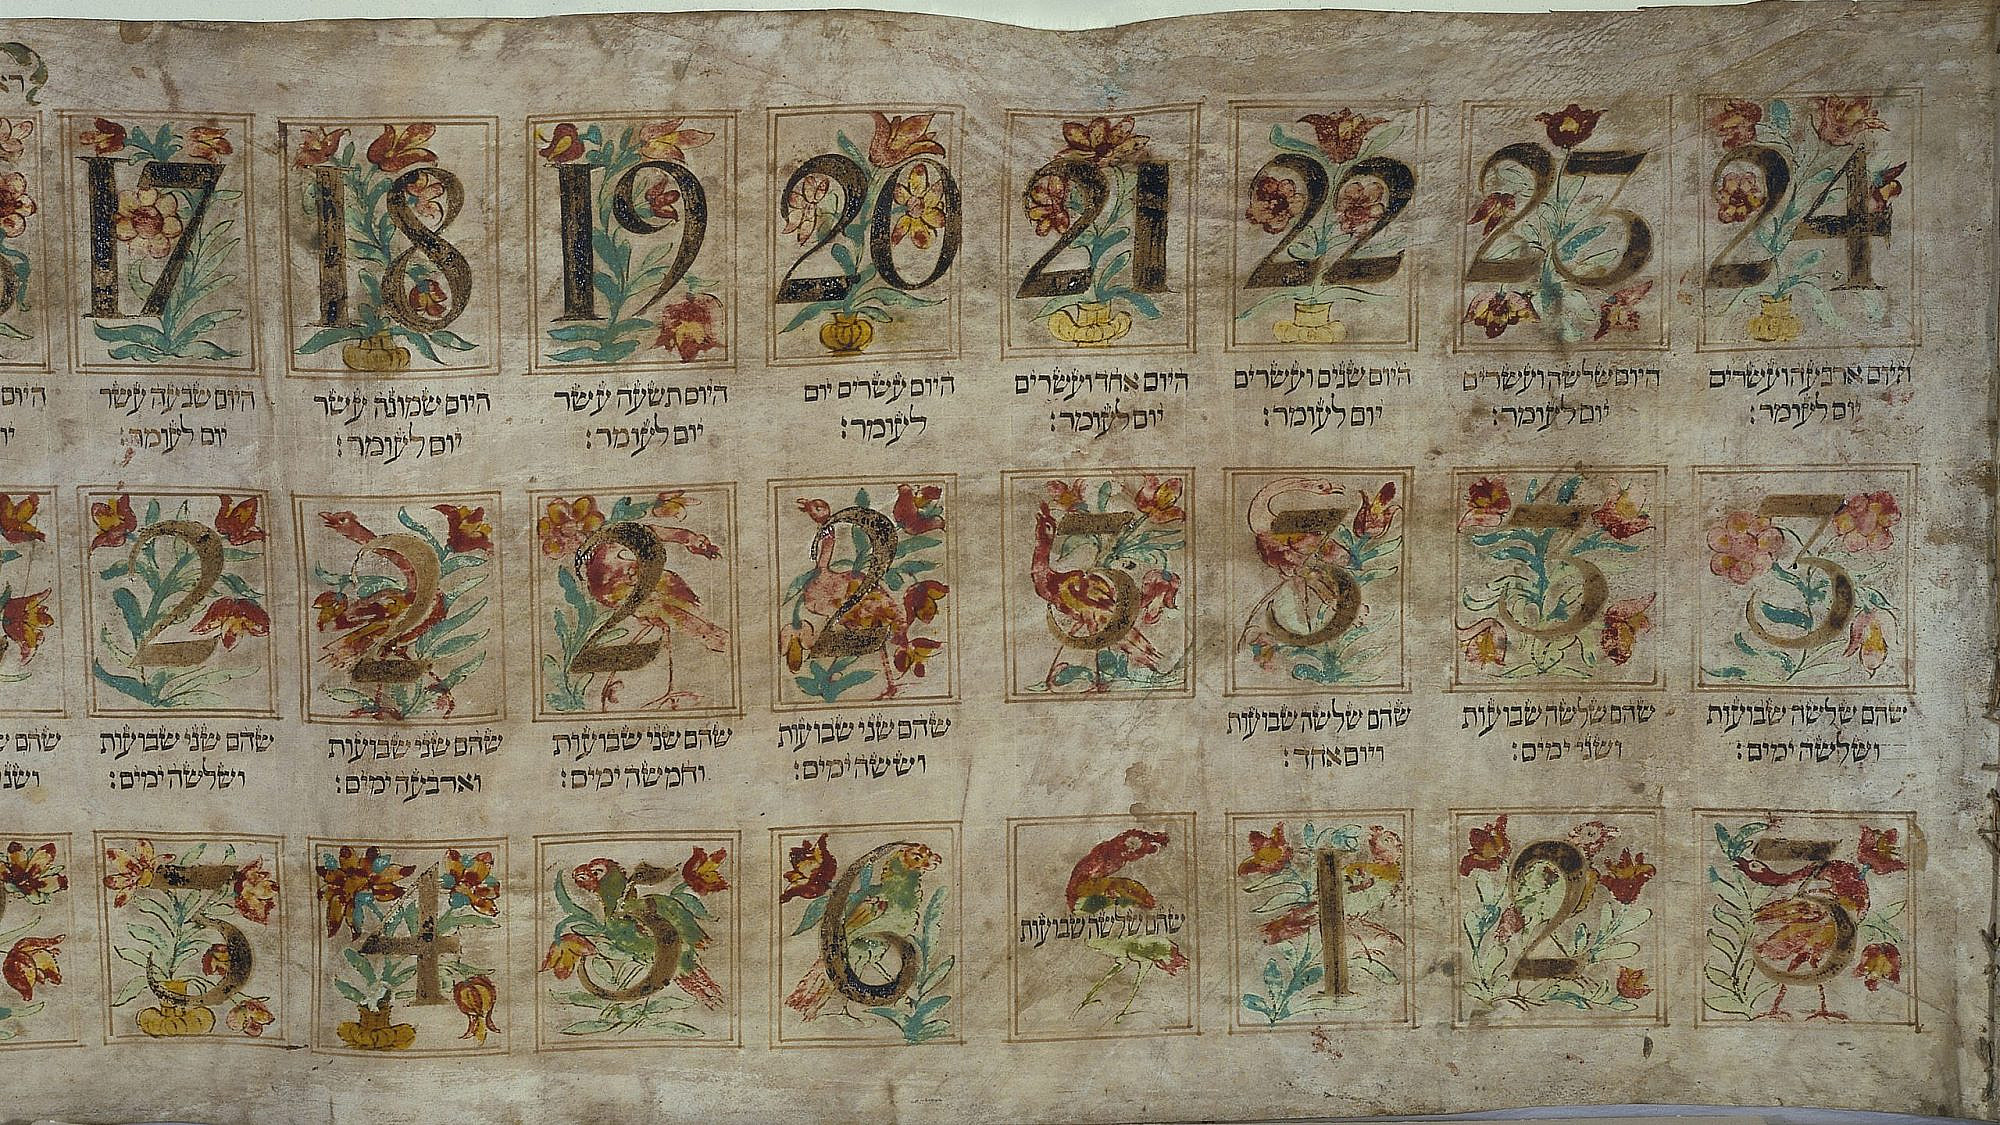 Omer calendar, 18th century, the Netherlands, ink and gouache on parchment. Credit: Courtesy of the Jewish Museum, New York, gift of Dr. Harry G. Friedman.